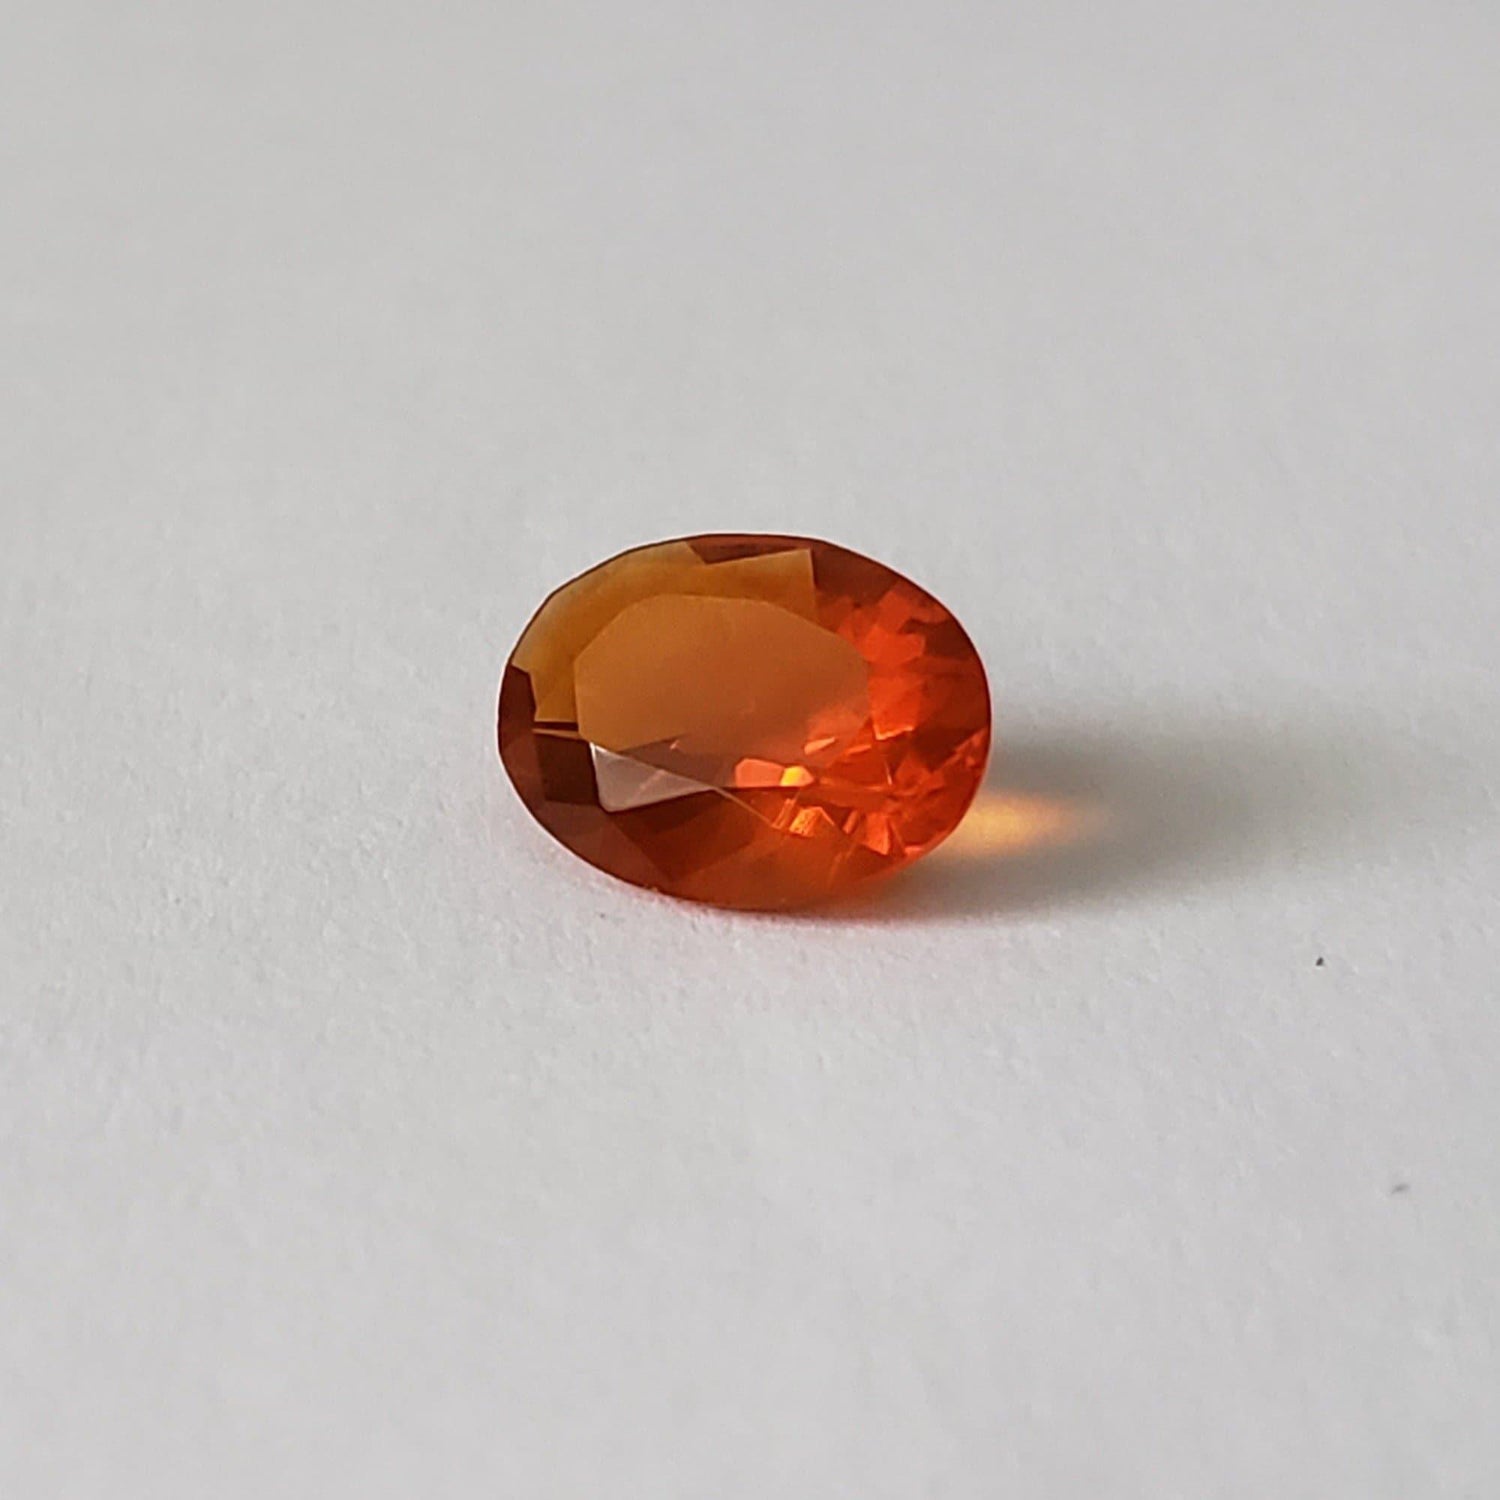 Cherry Opal | Oval Cut | Reddish Orange | Natural | 9x7mm 1.11ct | Appraisal Included